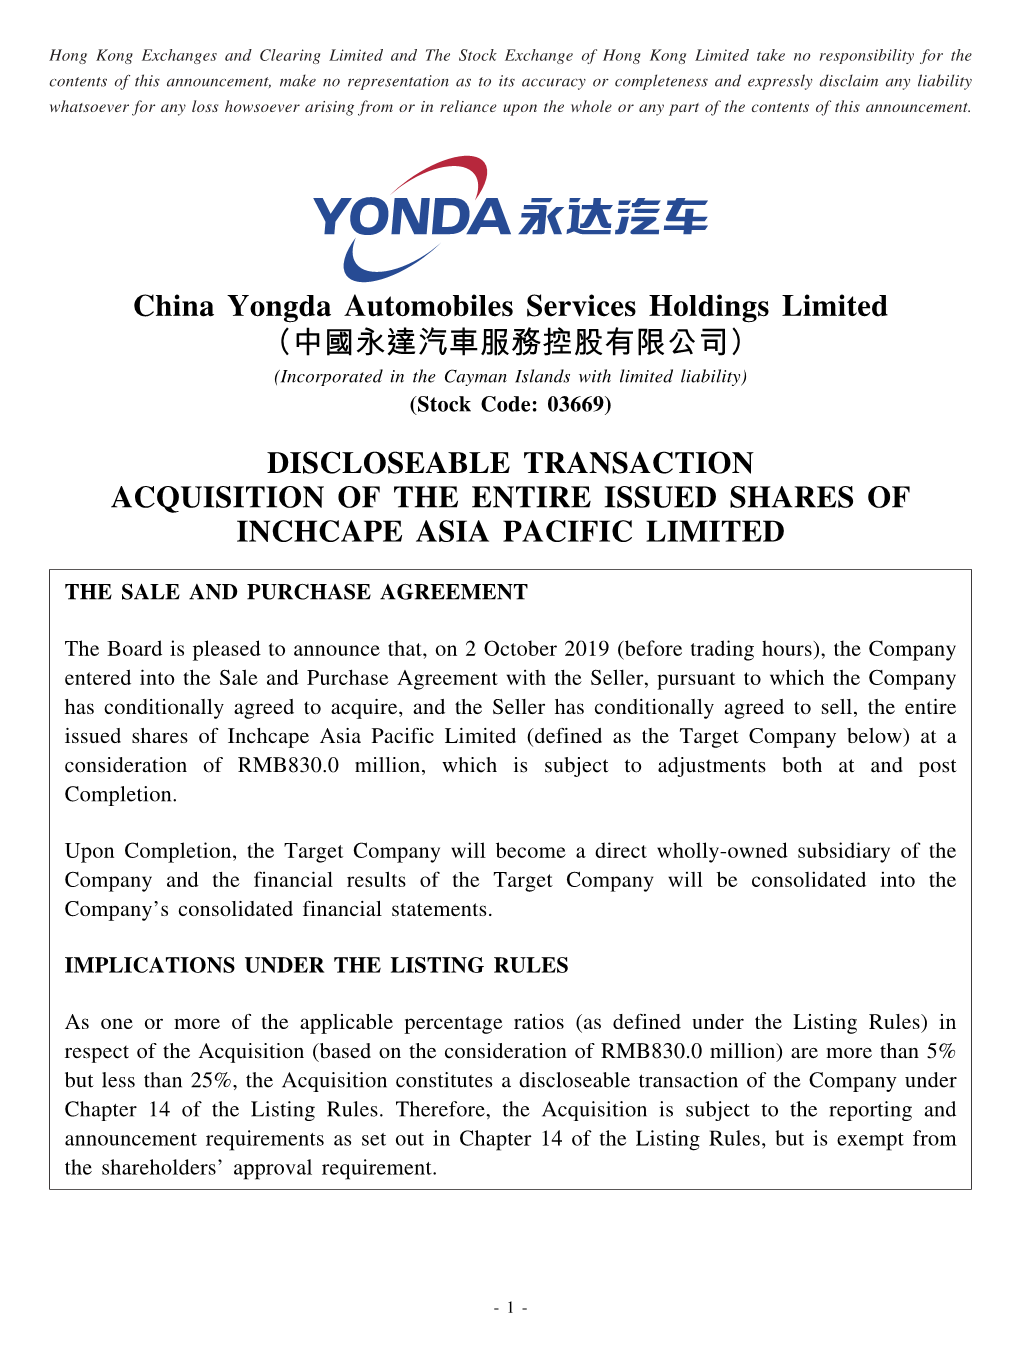 China Yongda Automobiles Services Holdings Limited （中國永達汽車服務控股有限公司） (Incorporated in the Cayman Islands with Limited Liability) (Stock Code: 03669)